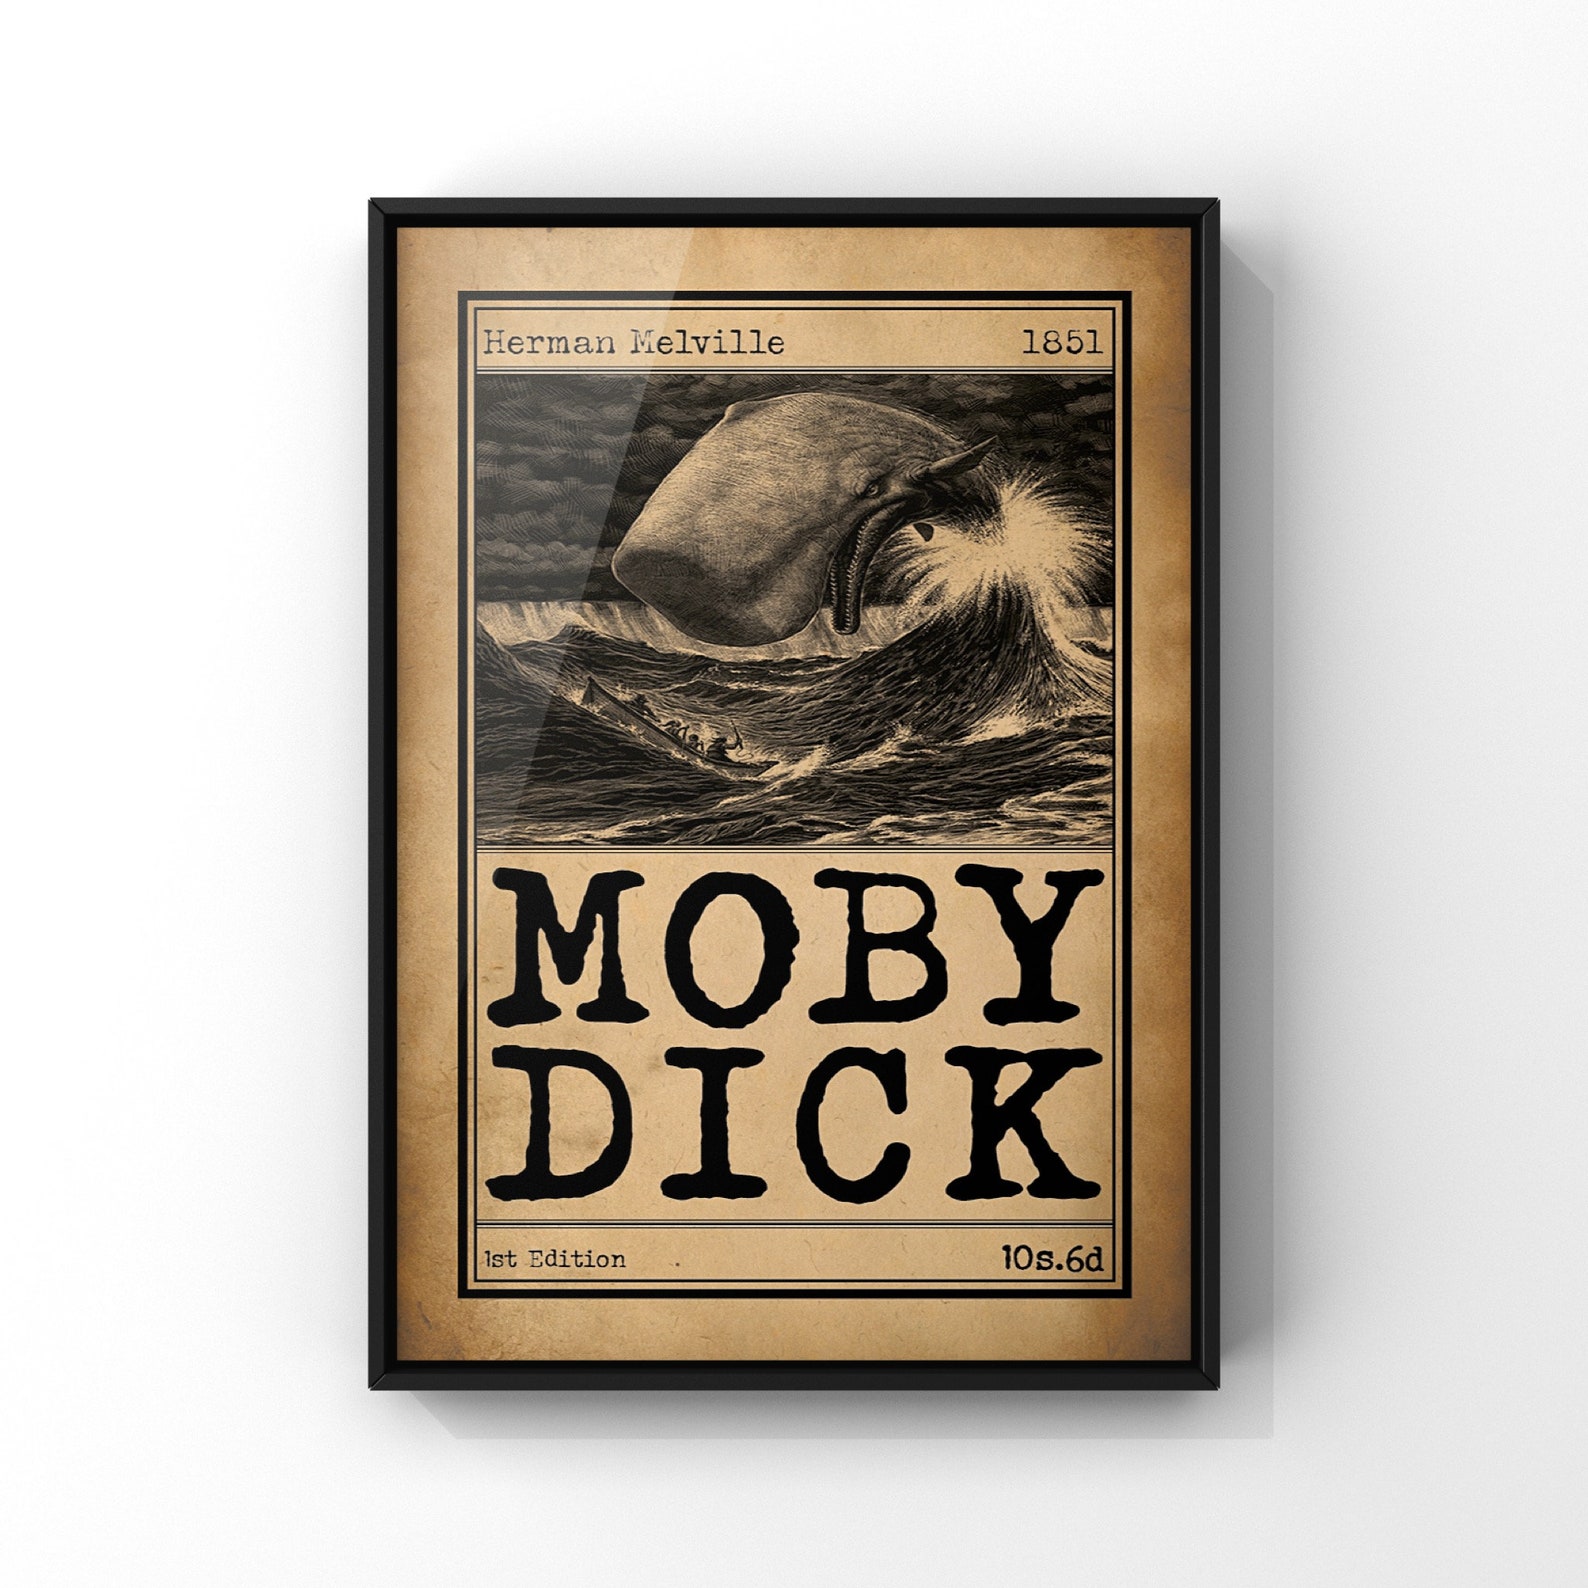 Moby dick vintage cover